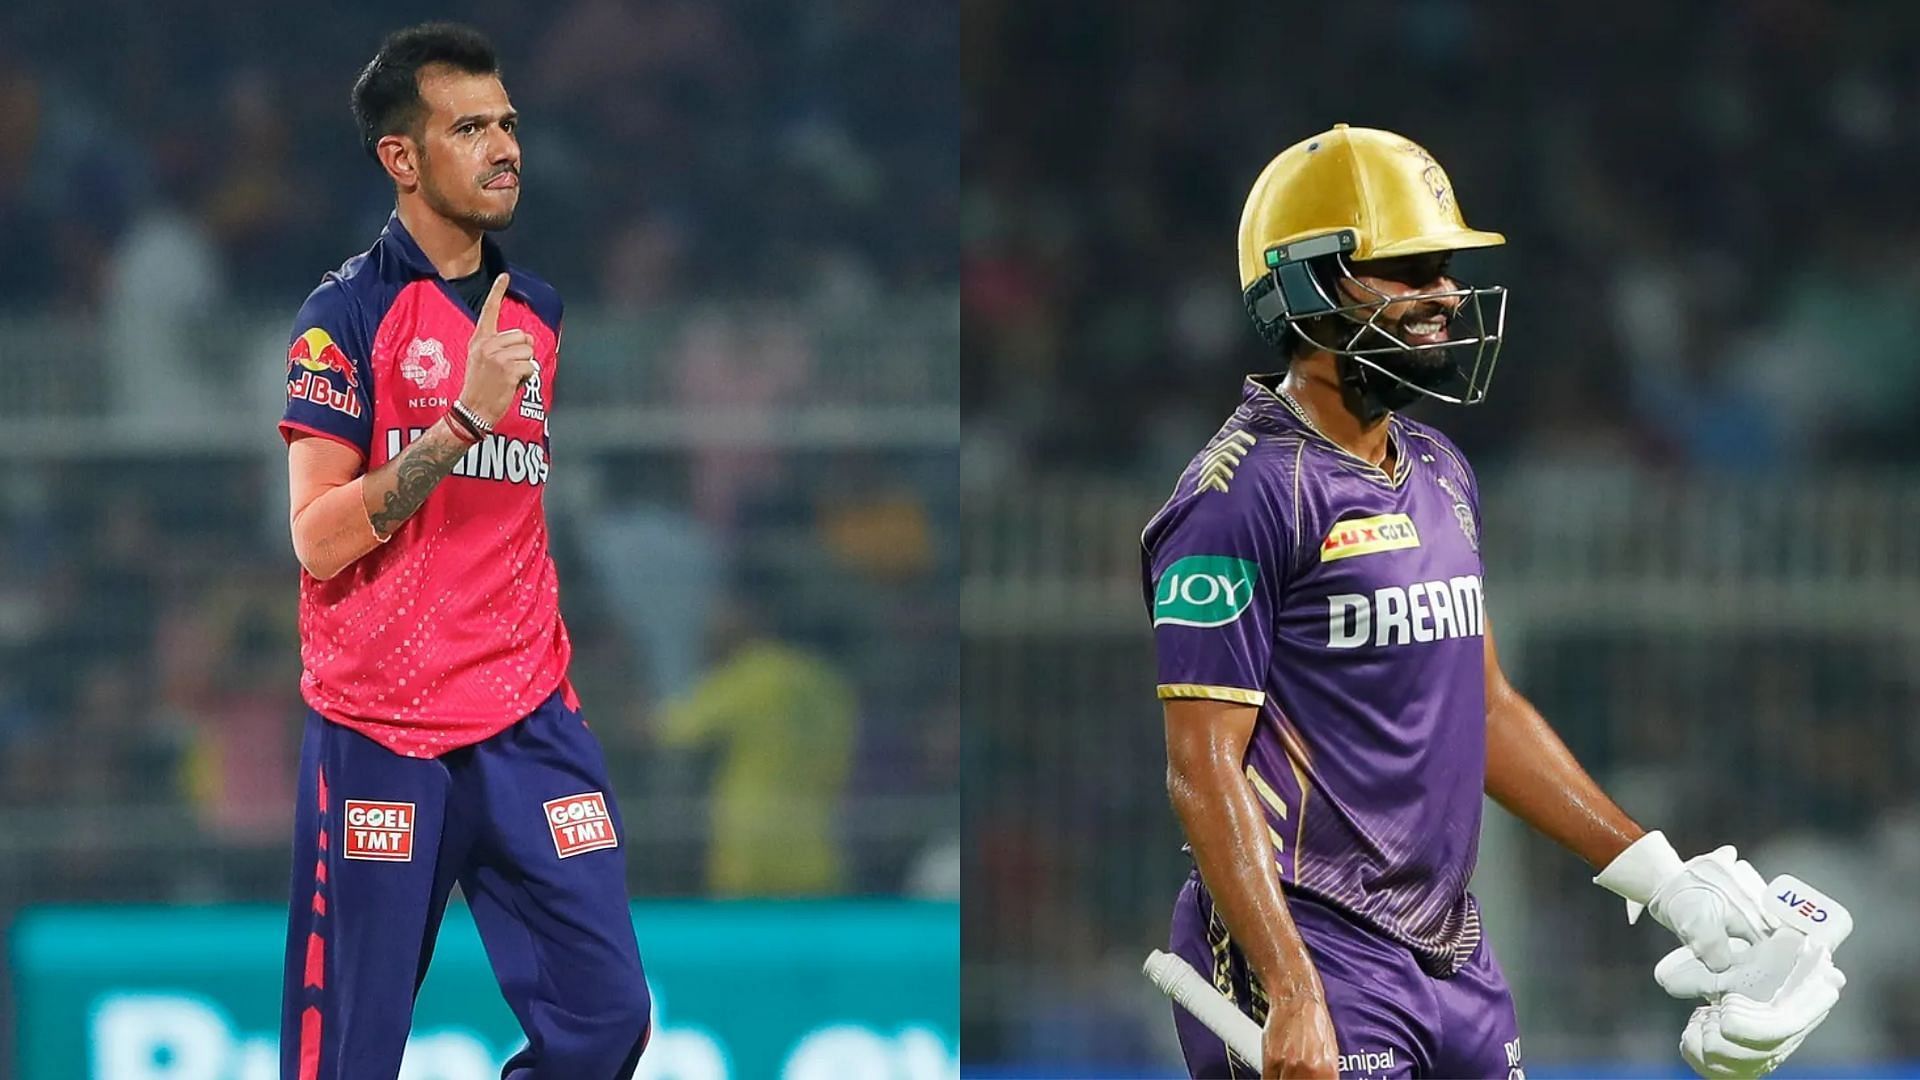 Yuzvendra Chahal (L) &amp; Shreyas Iyer had a nice little player-battle within the game